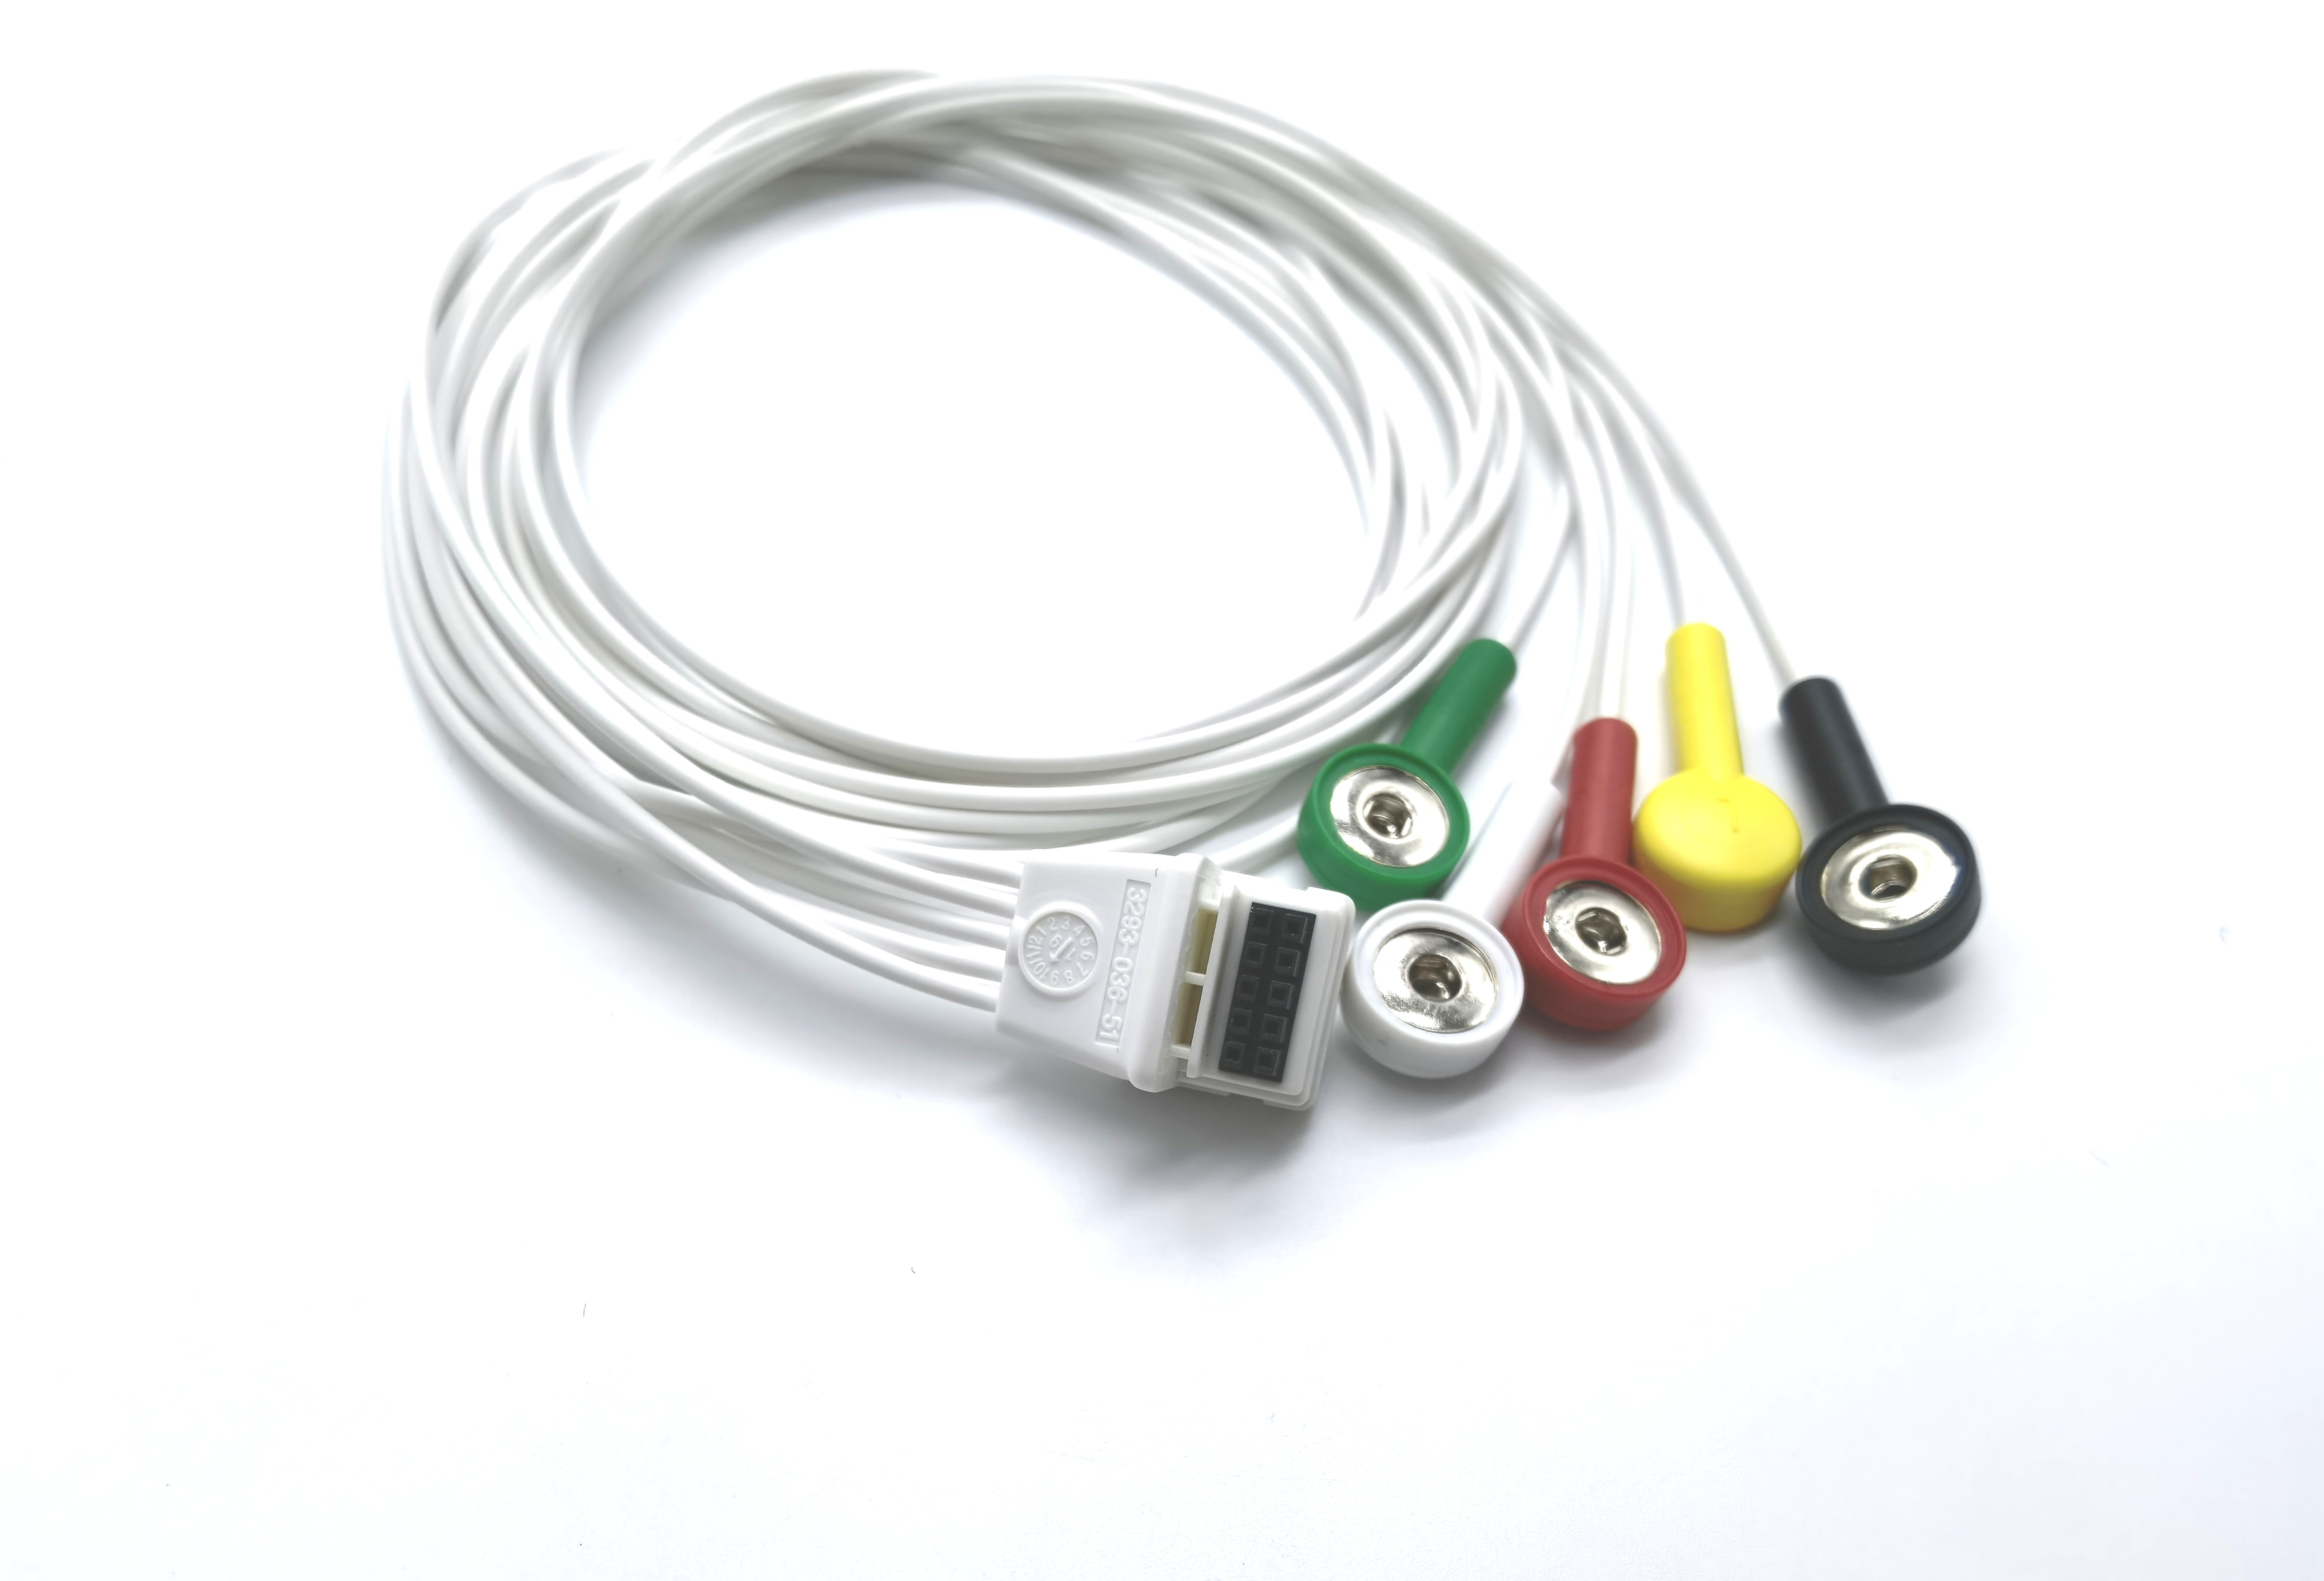 Mortara H3 5 Leads IEC AHA ECG Lead Wires With Snap Type for Holter Recorder